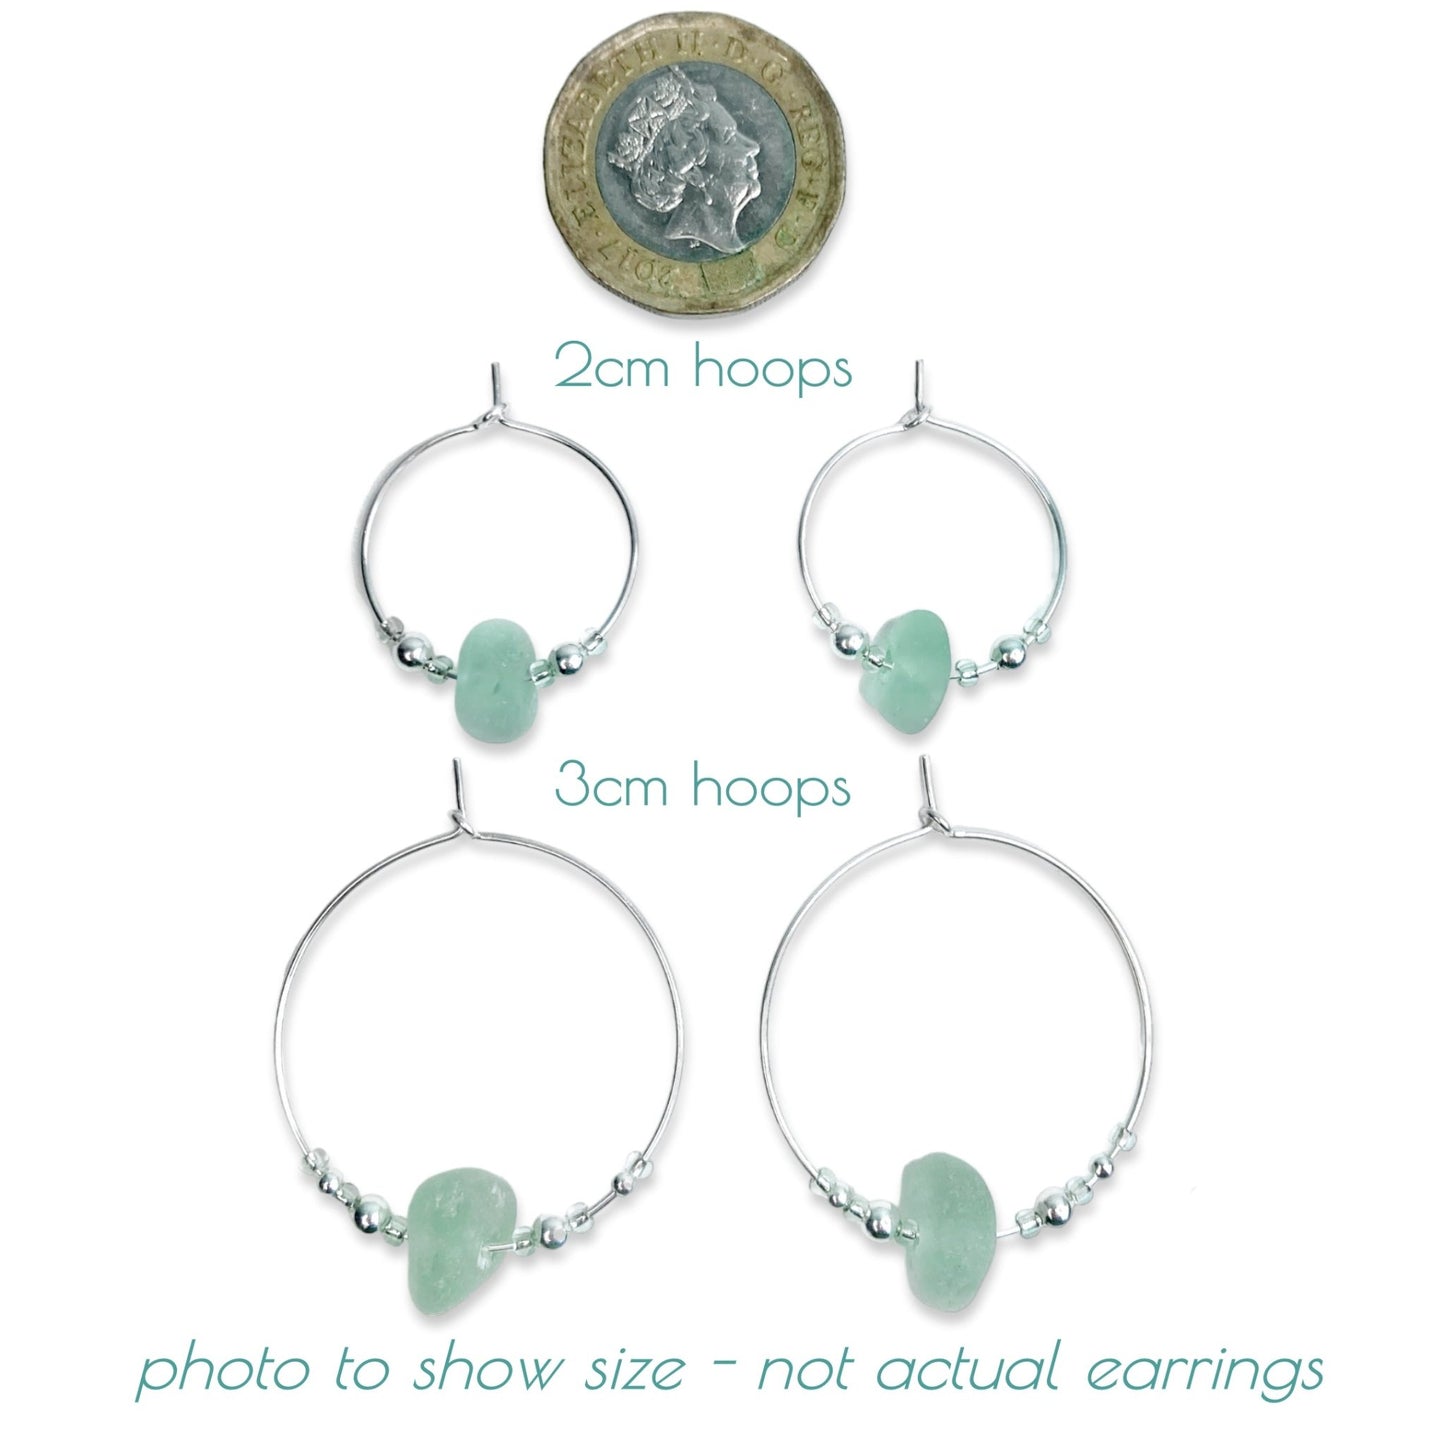 Green Sea Glass Small Hoop Earrings - 2cm Sterling Silver with Jade Crystal Beads - East Neuk Beach Crafts